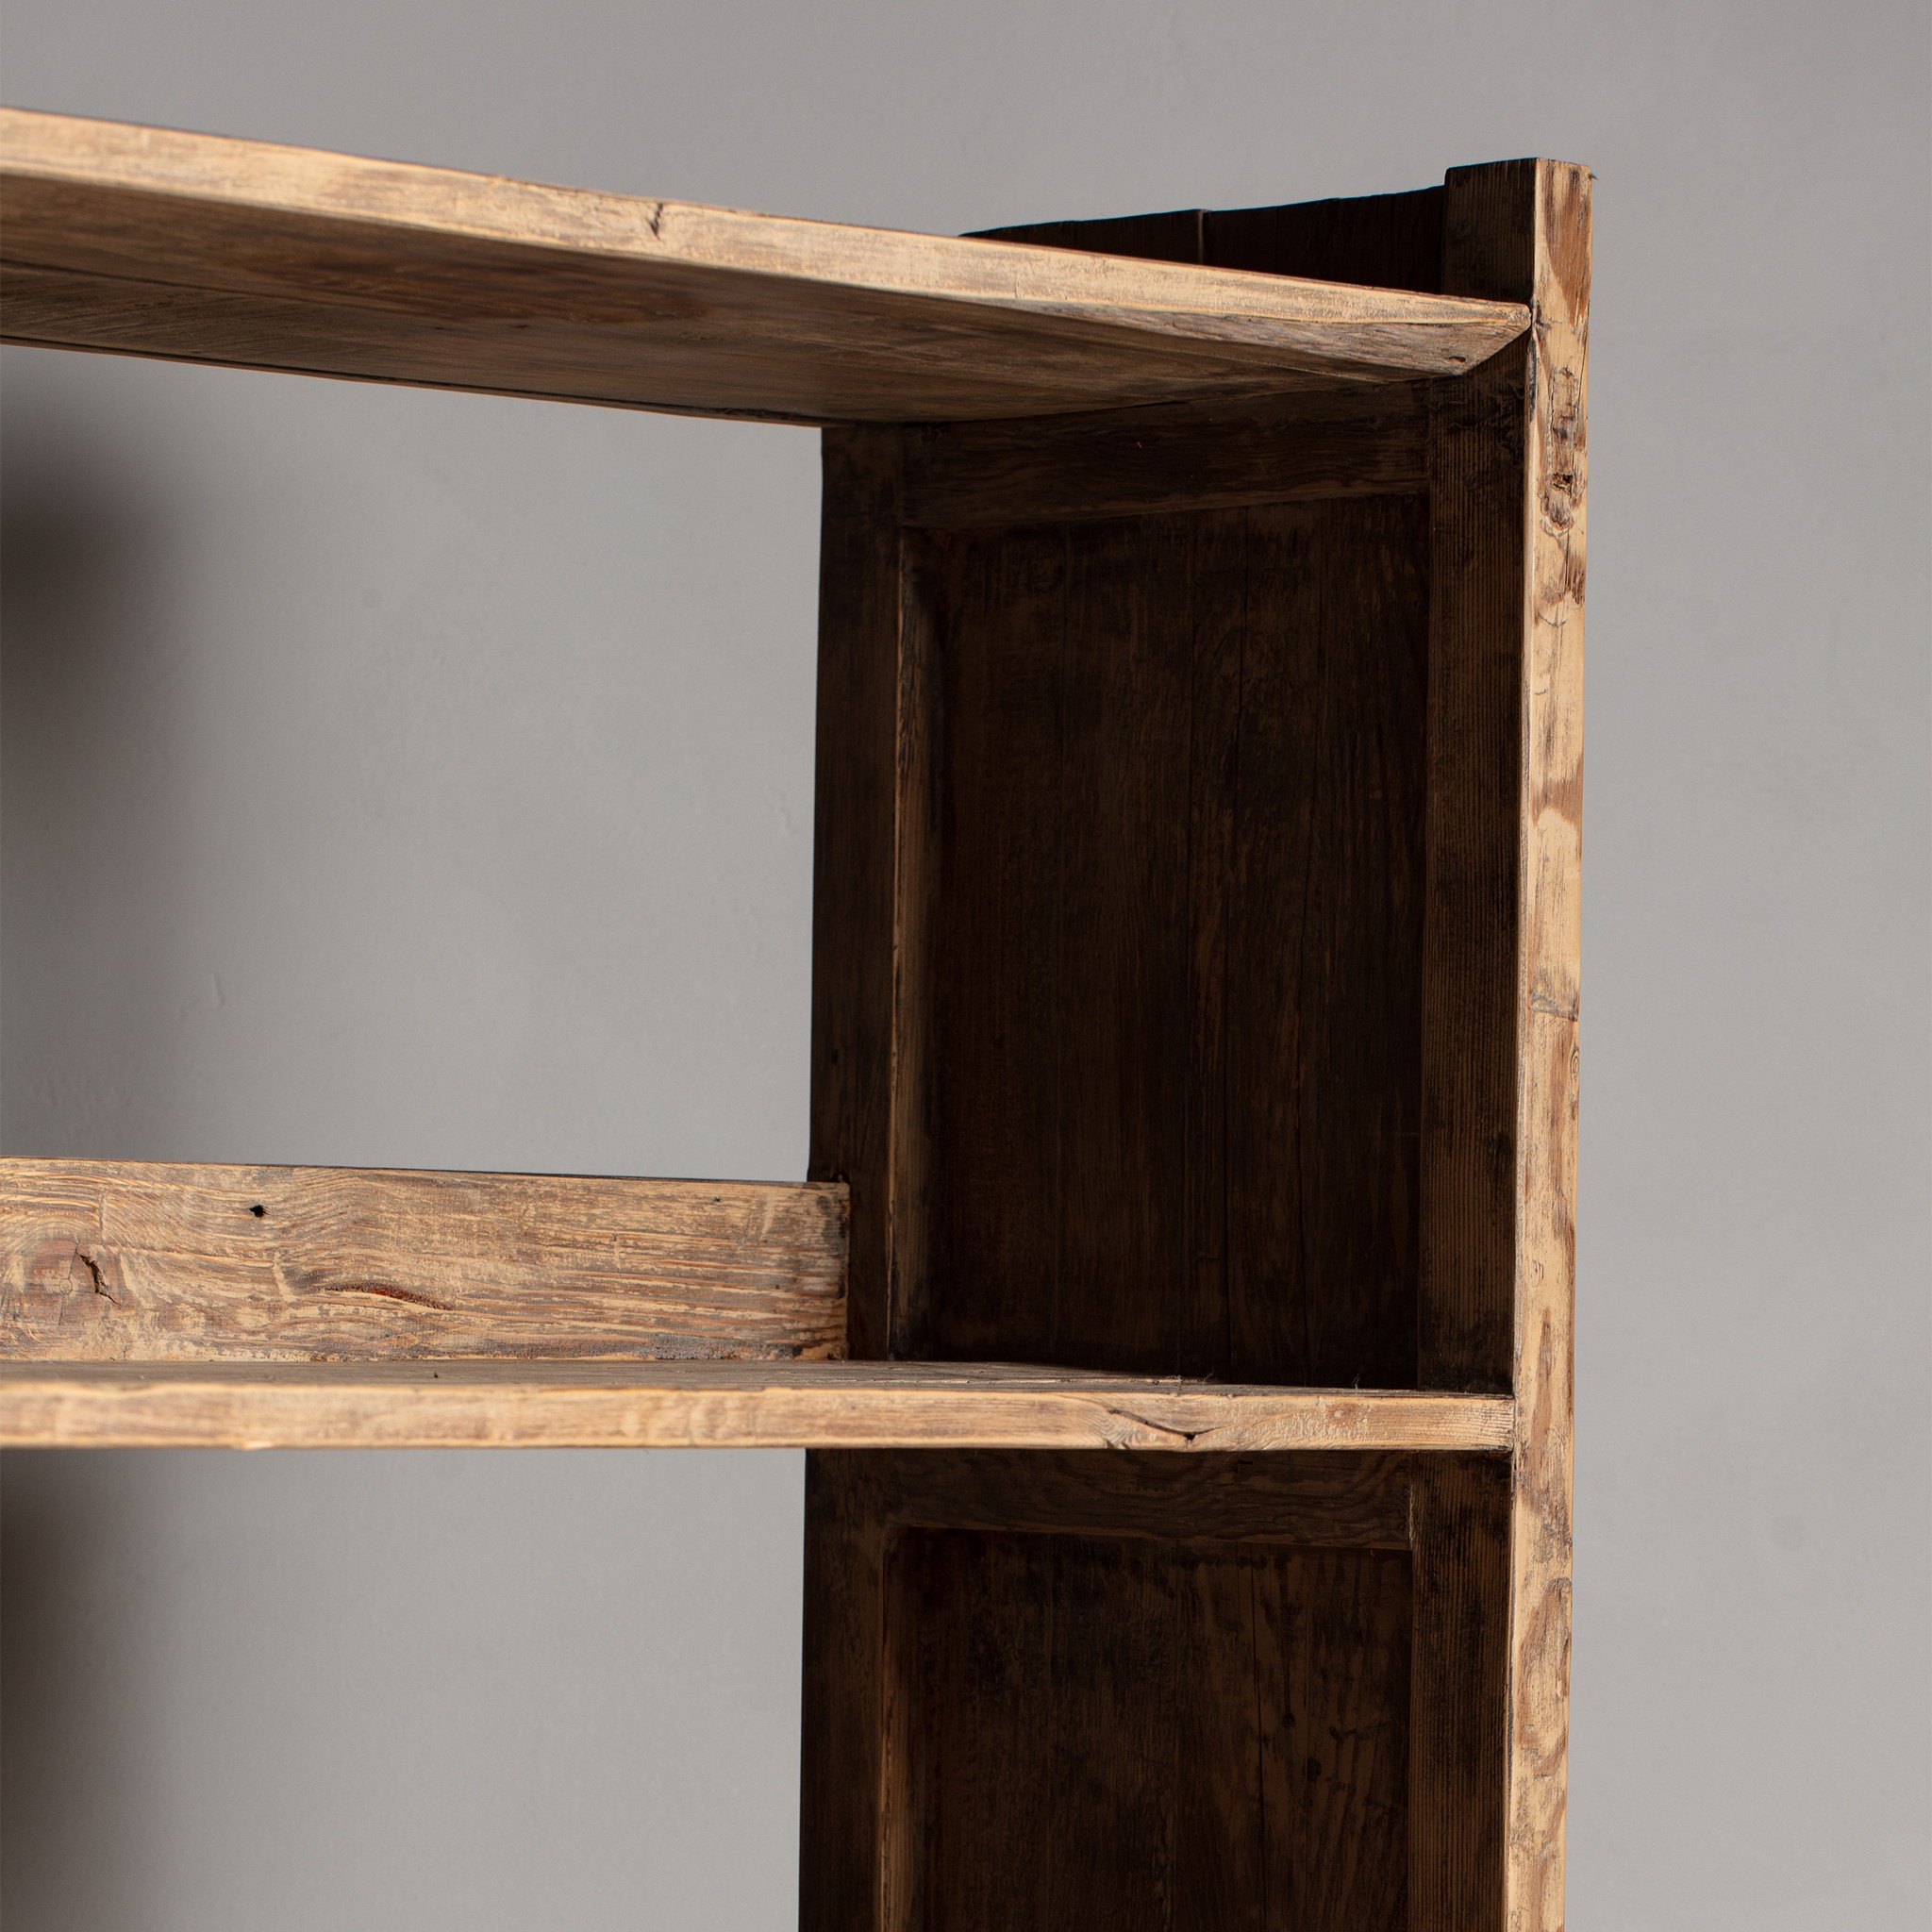 a wooden shelf with two open shelves on top of it